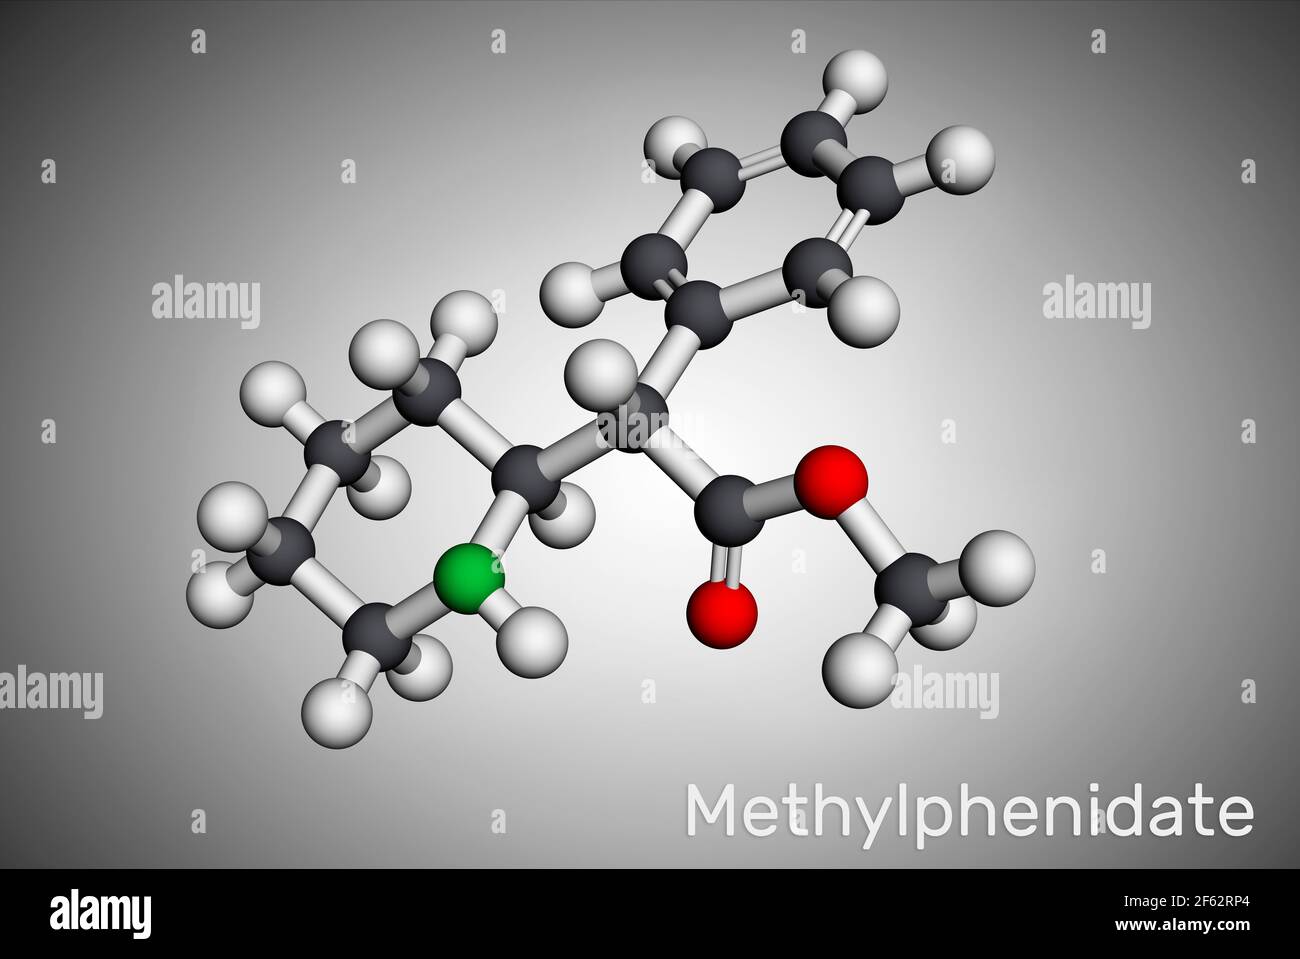 Methylphenidate, MP, MPH molecule. It is central nervous system stimulant. Used in treatment of Attention-Deficit Hyperactivity Disorder, ADHD. Molecu Stock Photo